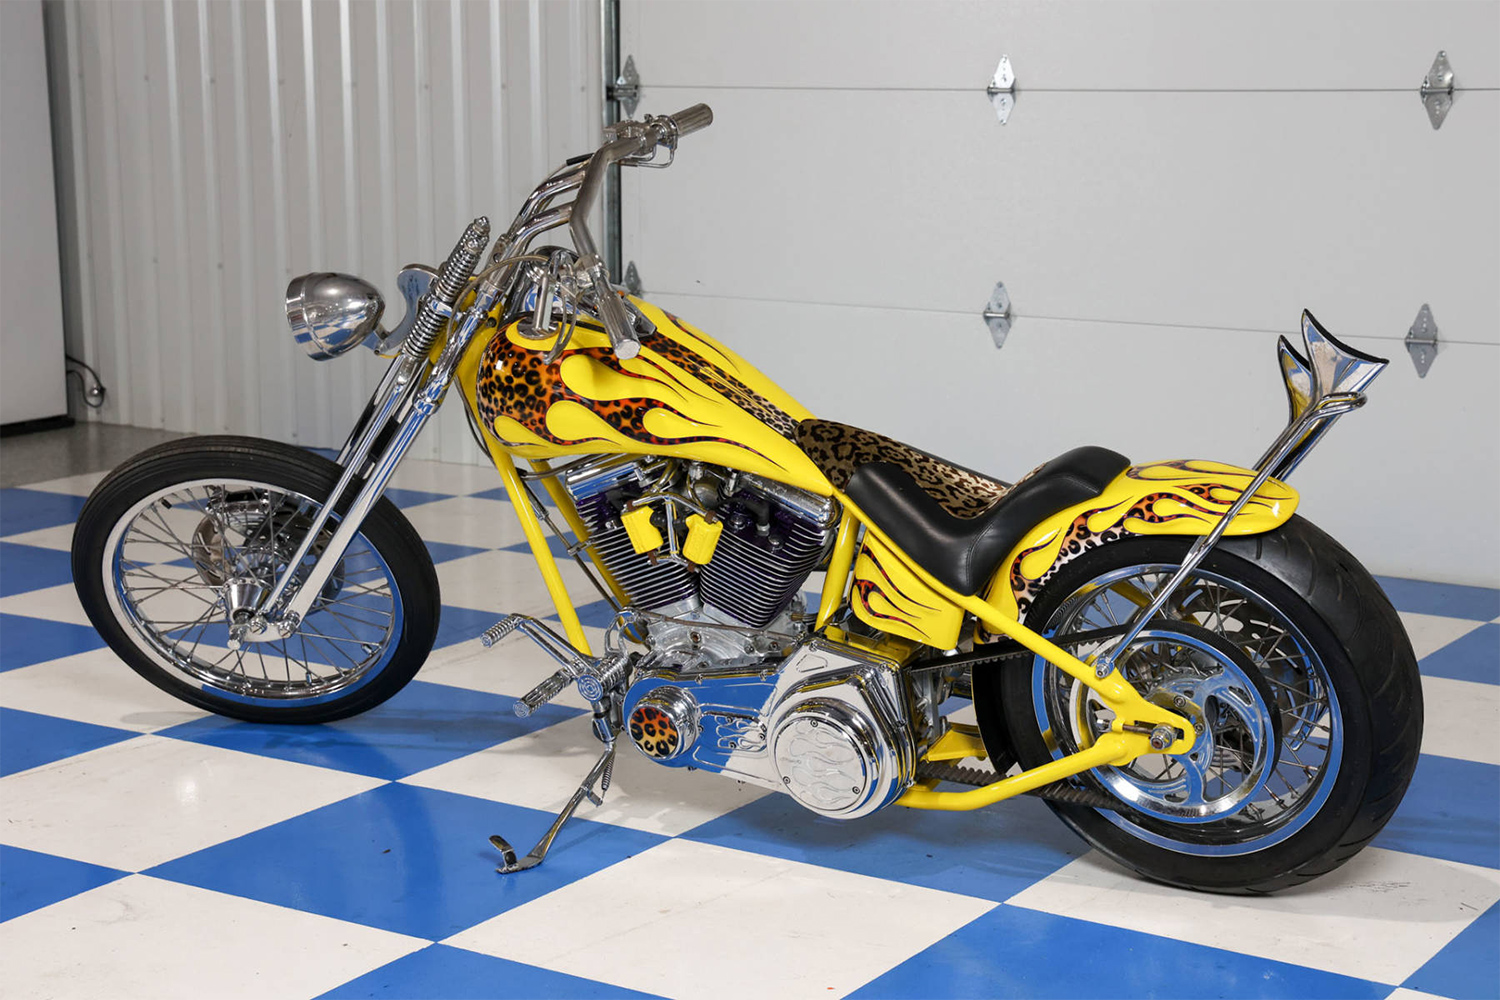 1998 Custom Chopper reportedly once owned by Dennis Rodman, now up for auction as part of the George Foreman Collection